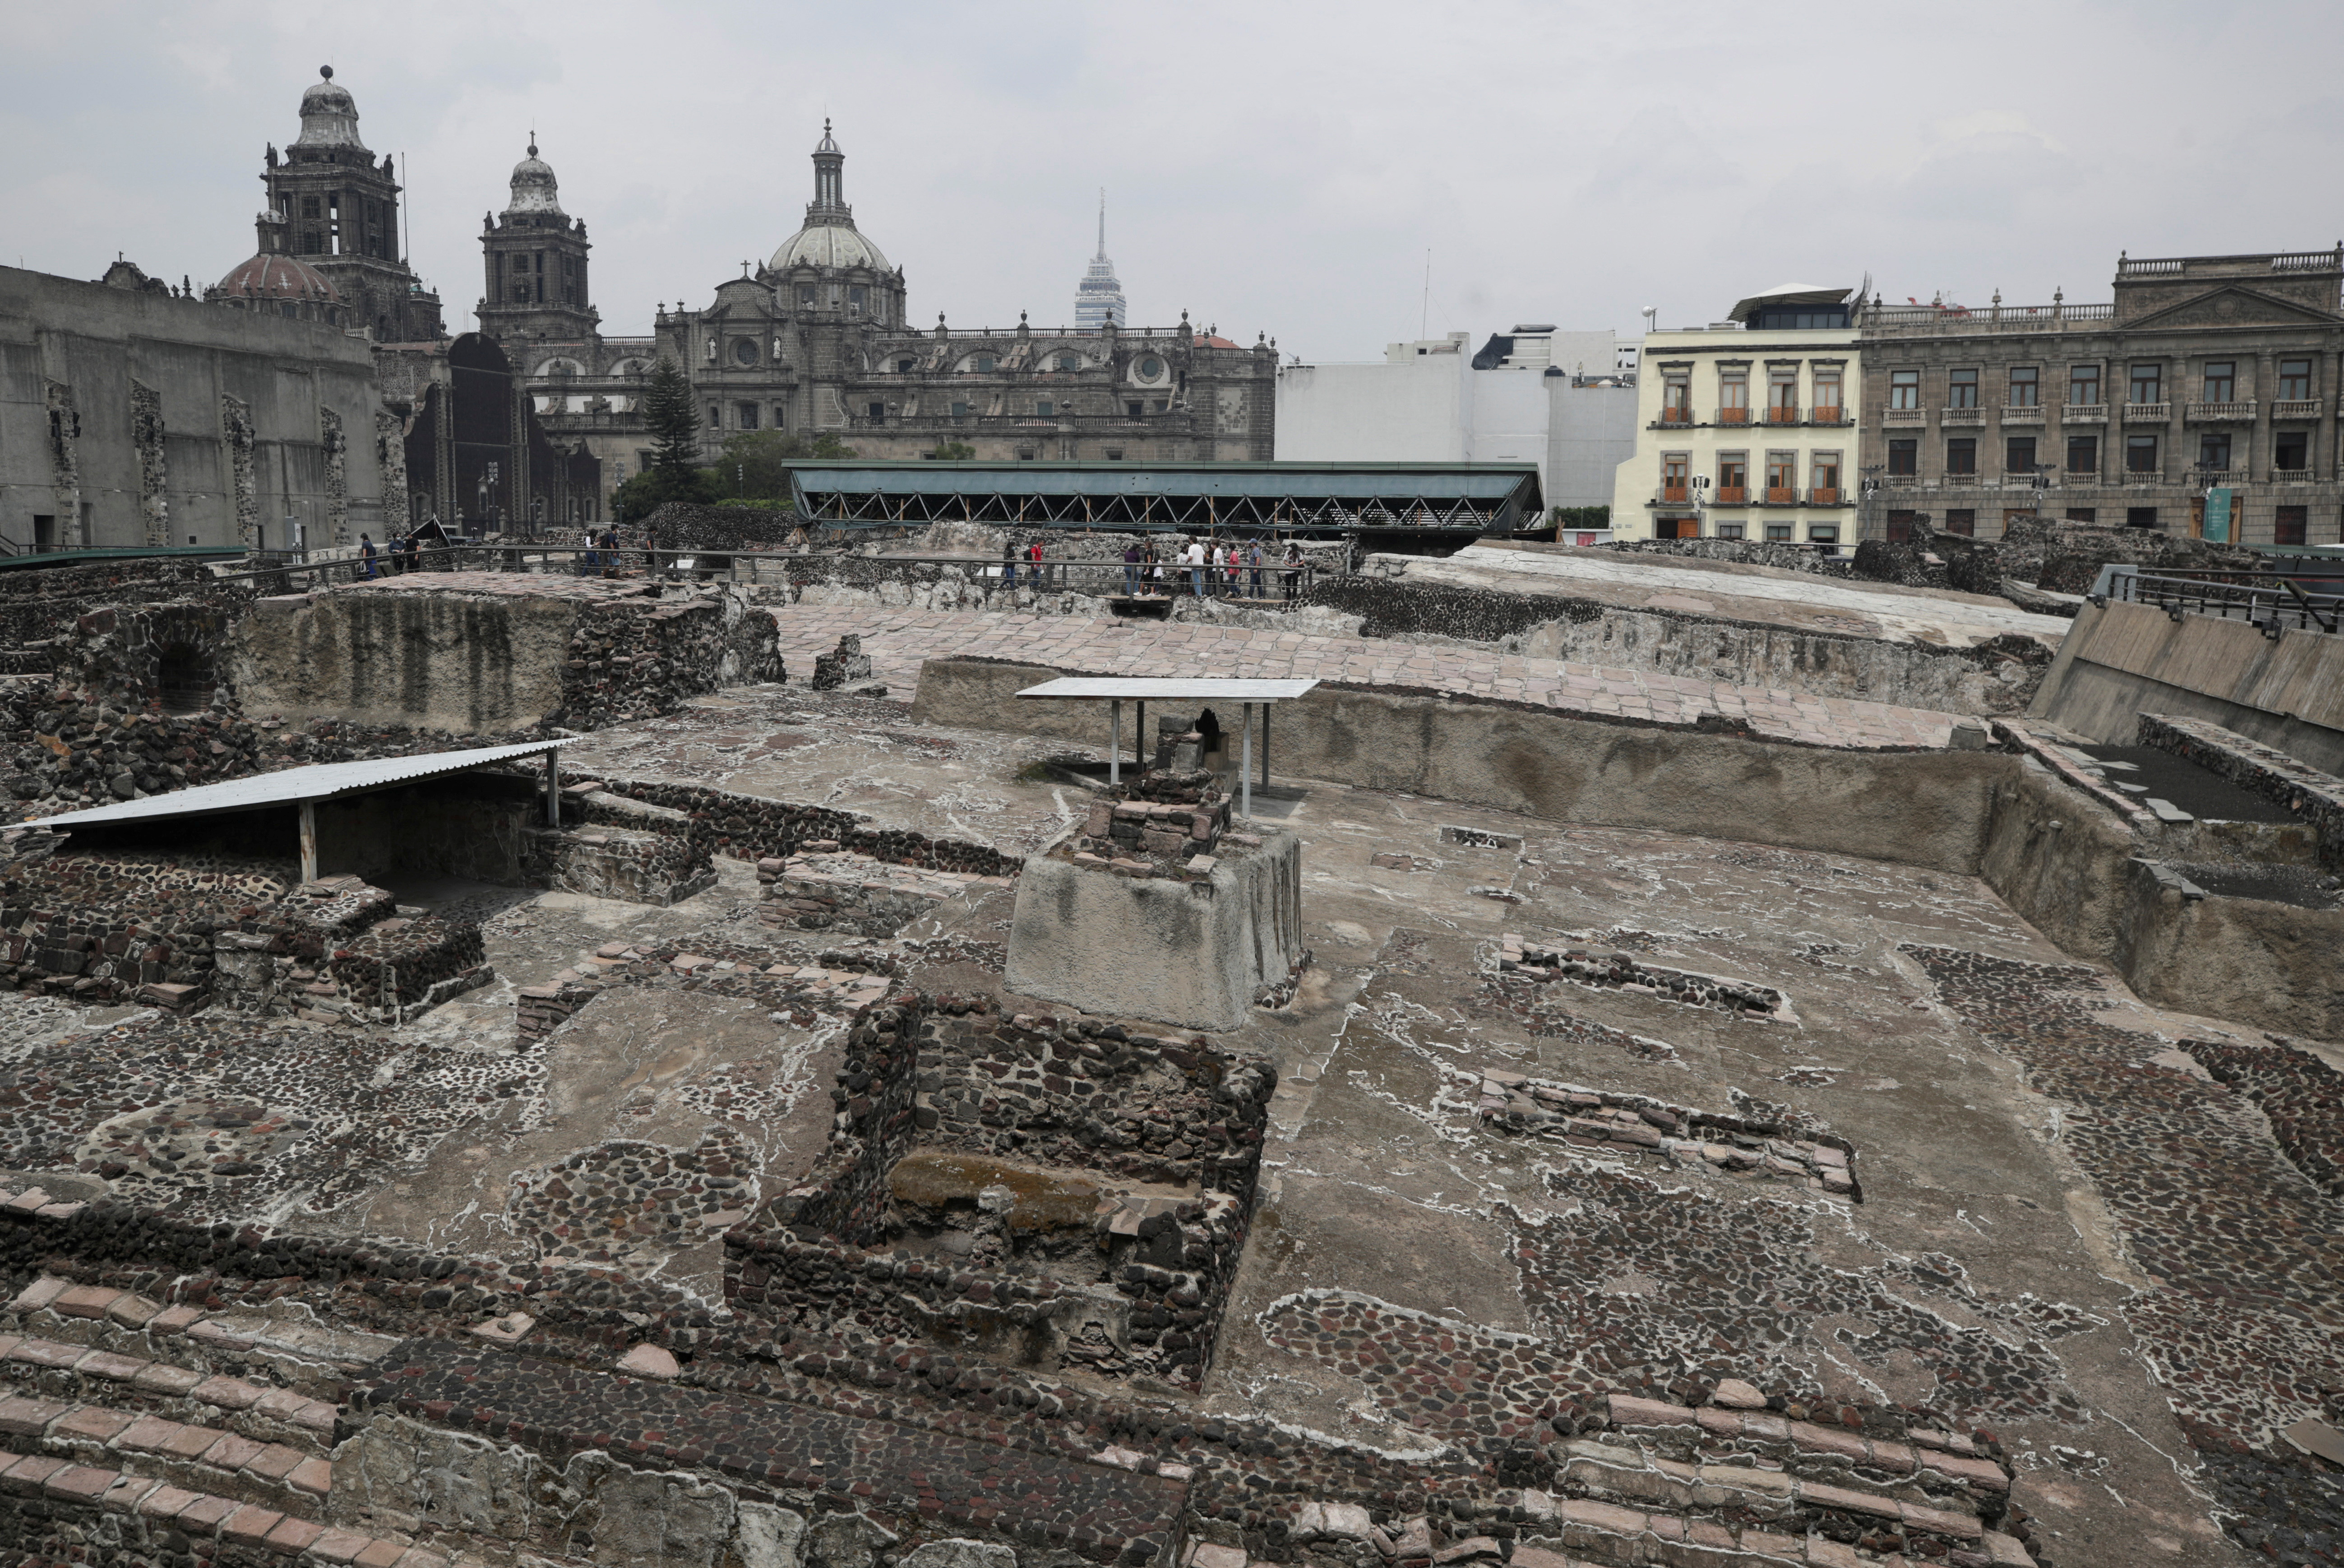 A view shows Aztec ruins at the Templo Mayor, one of Mexico's most important ancient sites, undergoing reconstruction after being damaged in a major storm, in Mexico City, Mexico July 7, 2022. Mexico's Metropolitan Cathedral is pictured in the background. REUTERS/Henry Romero